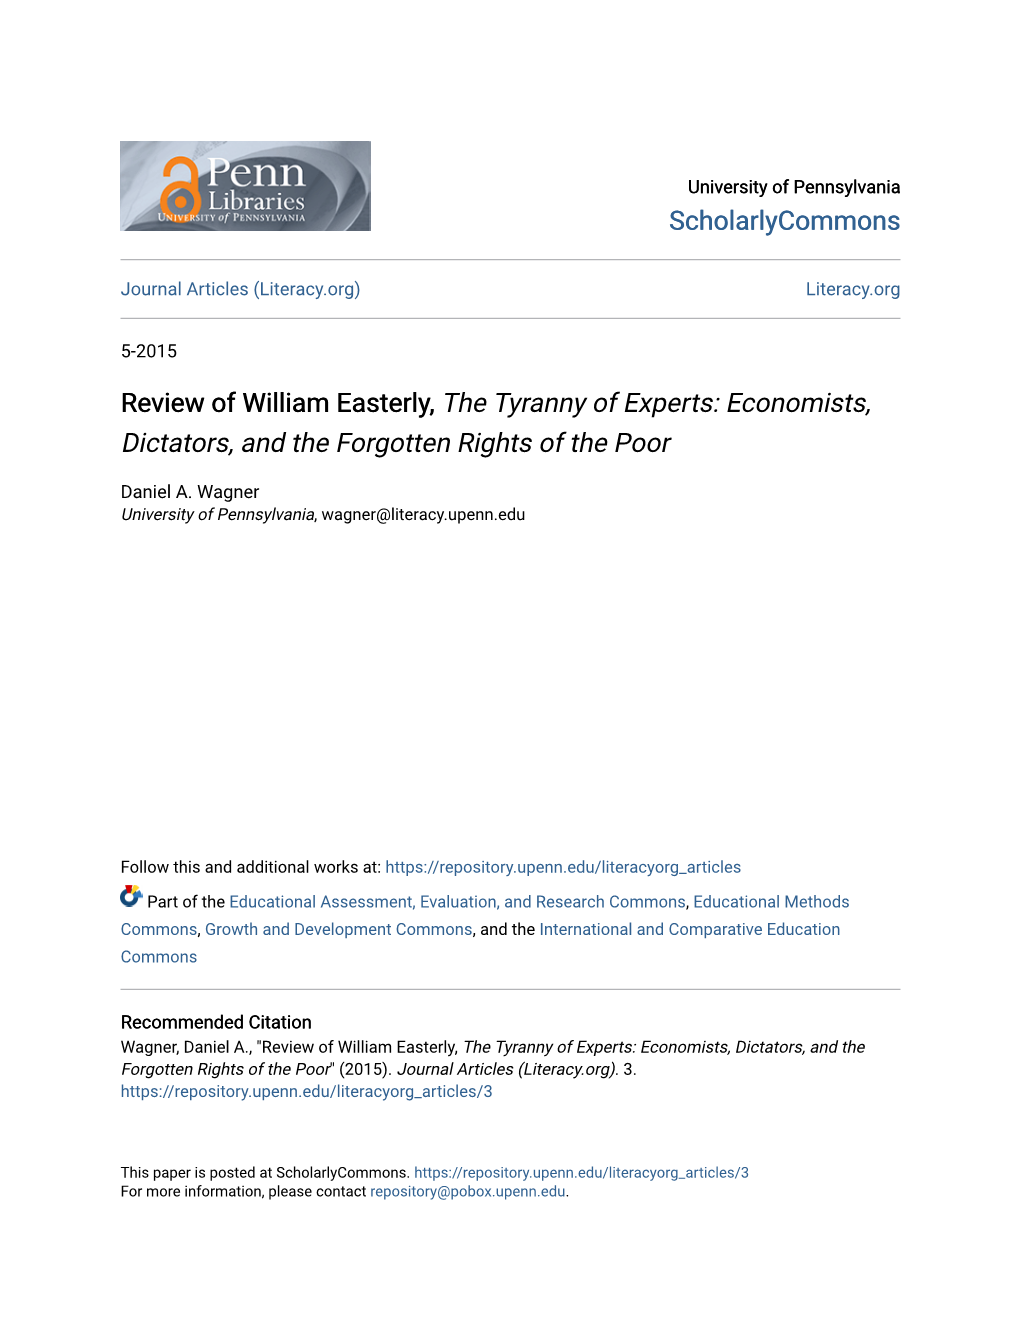 Review of William Easterly, the Tyranny of Experts: Economists, Dictators, and the Forgotten Rights of the Poor